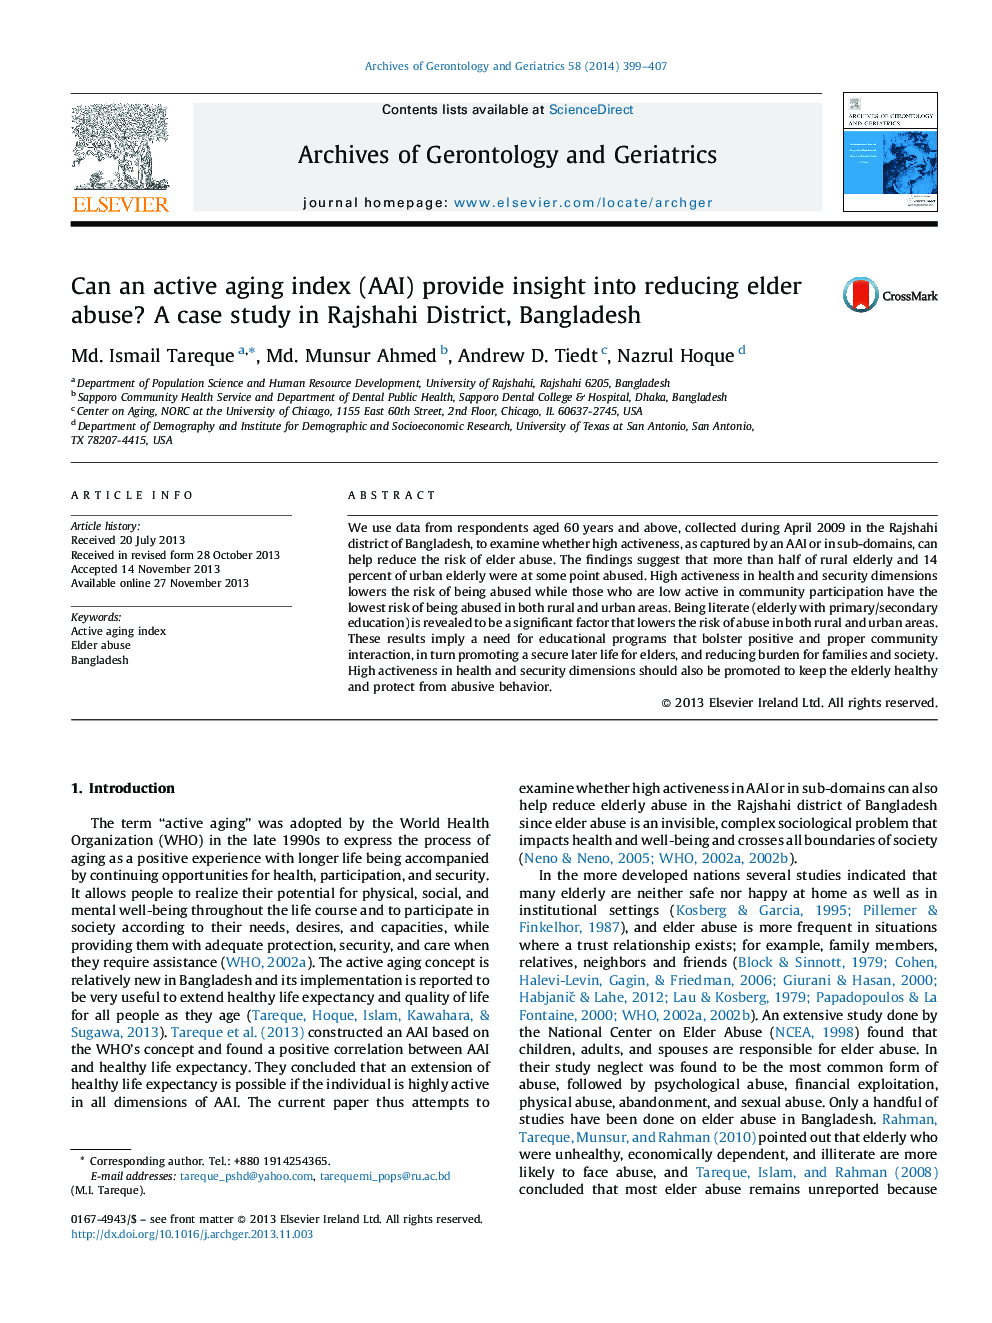 Can an active aging index (AAI) provide insight into reducing elder abuse? A case study in Rajshahi District, Bangladesh